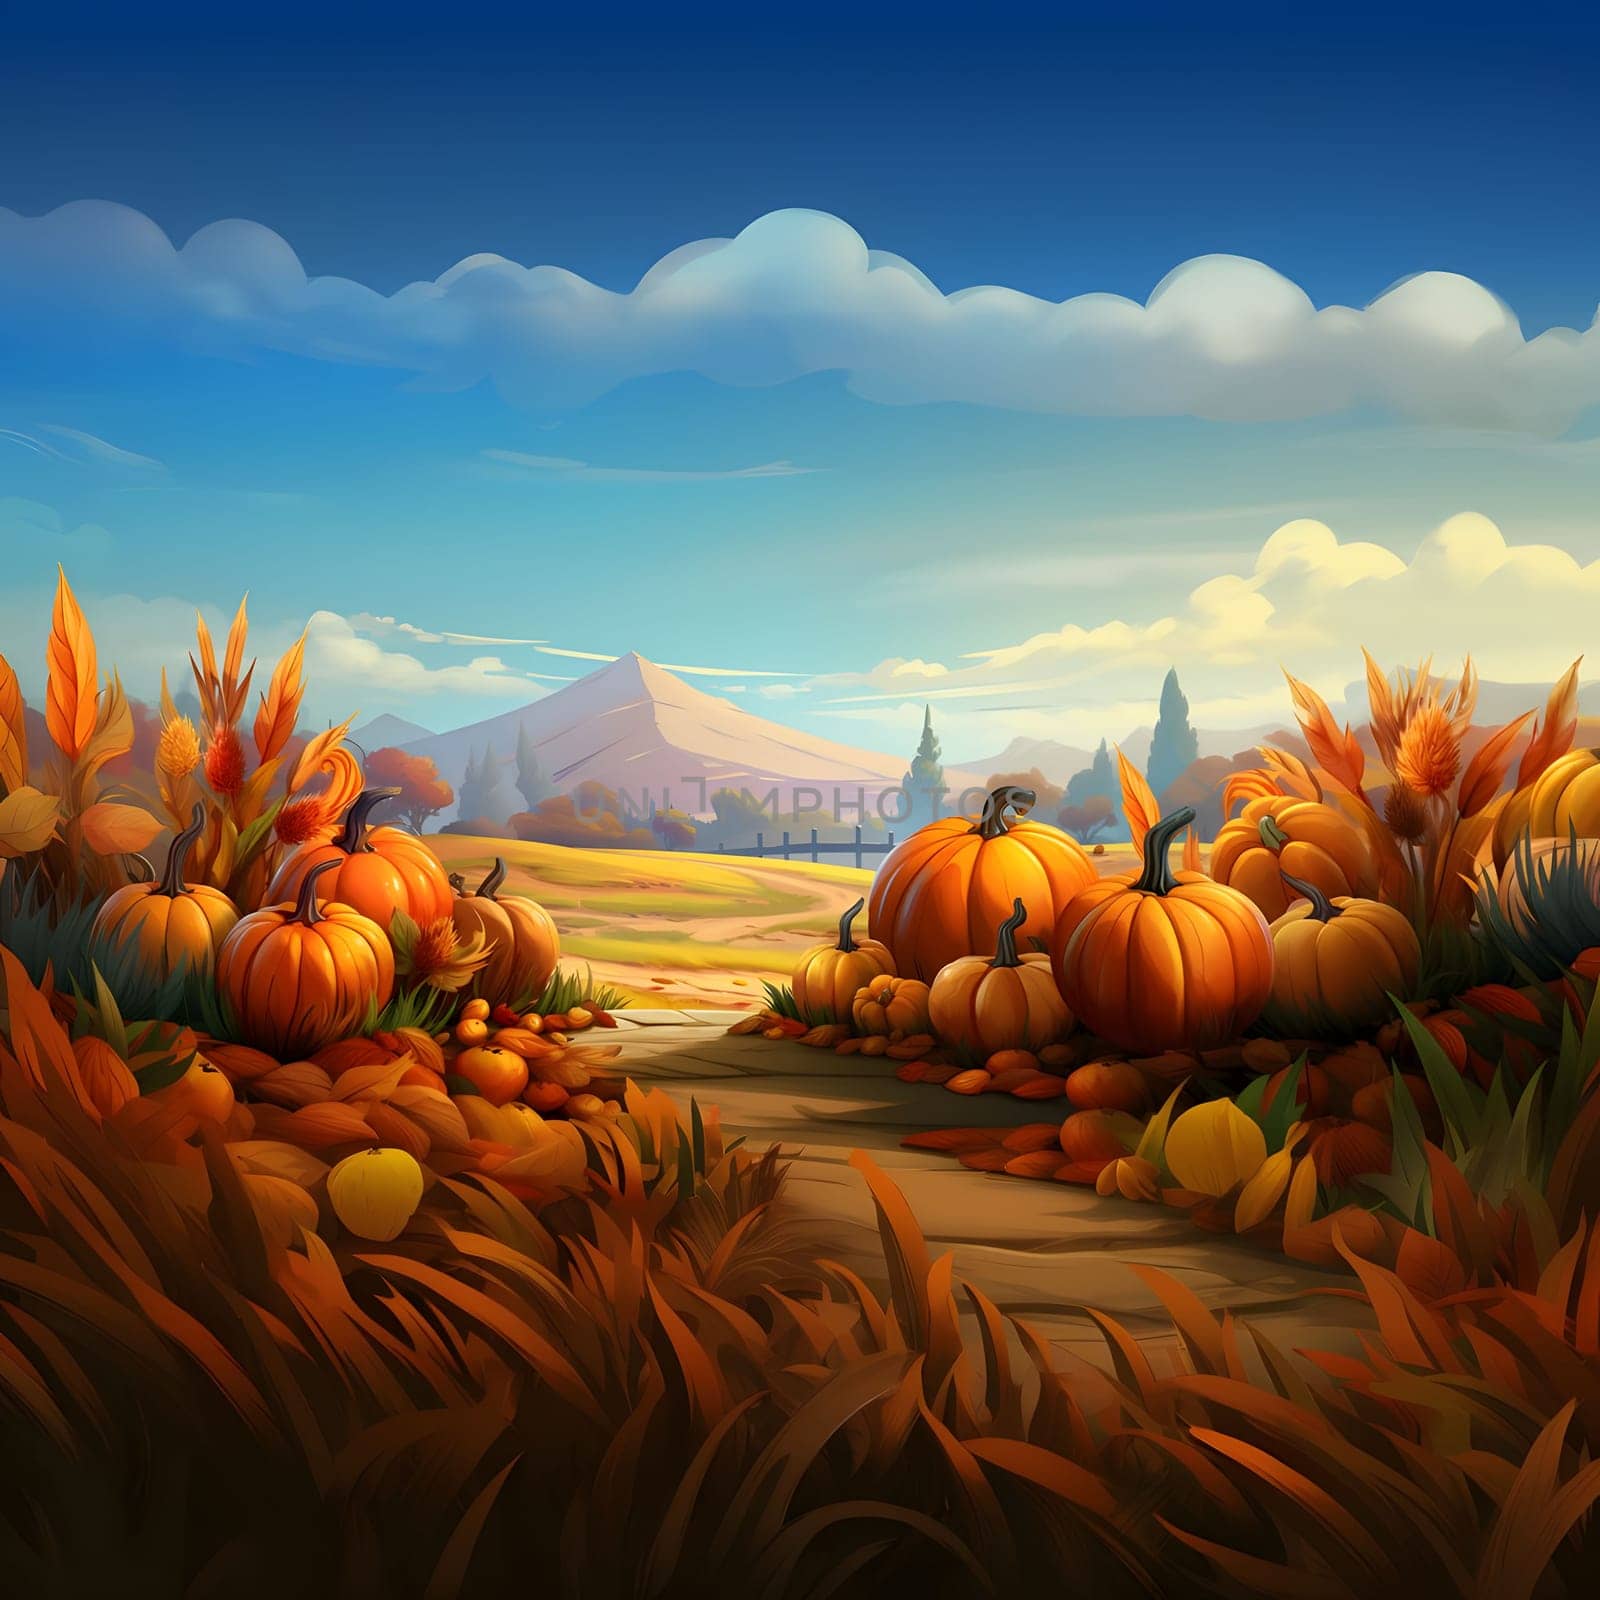 Illustration of grass, field, pumpkins and mountains in the background. Pumpkin as a dish of thanksgiving for the harvest. An atmosphere of joy and celebration.